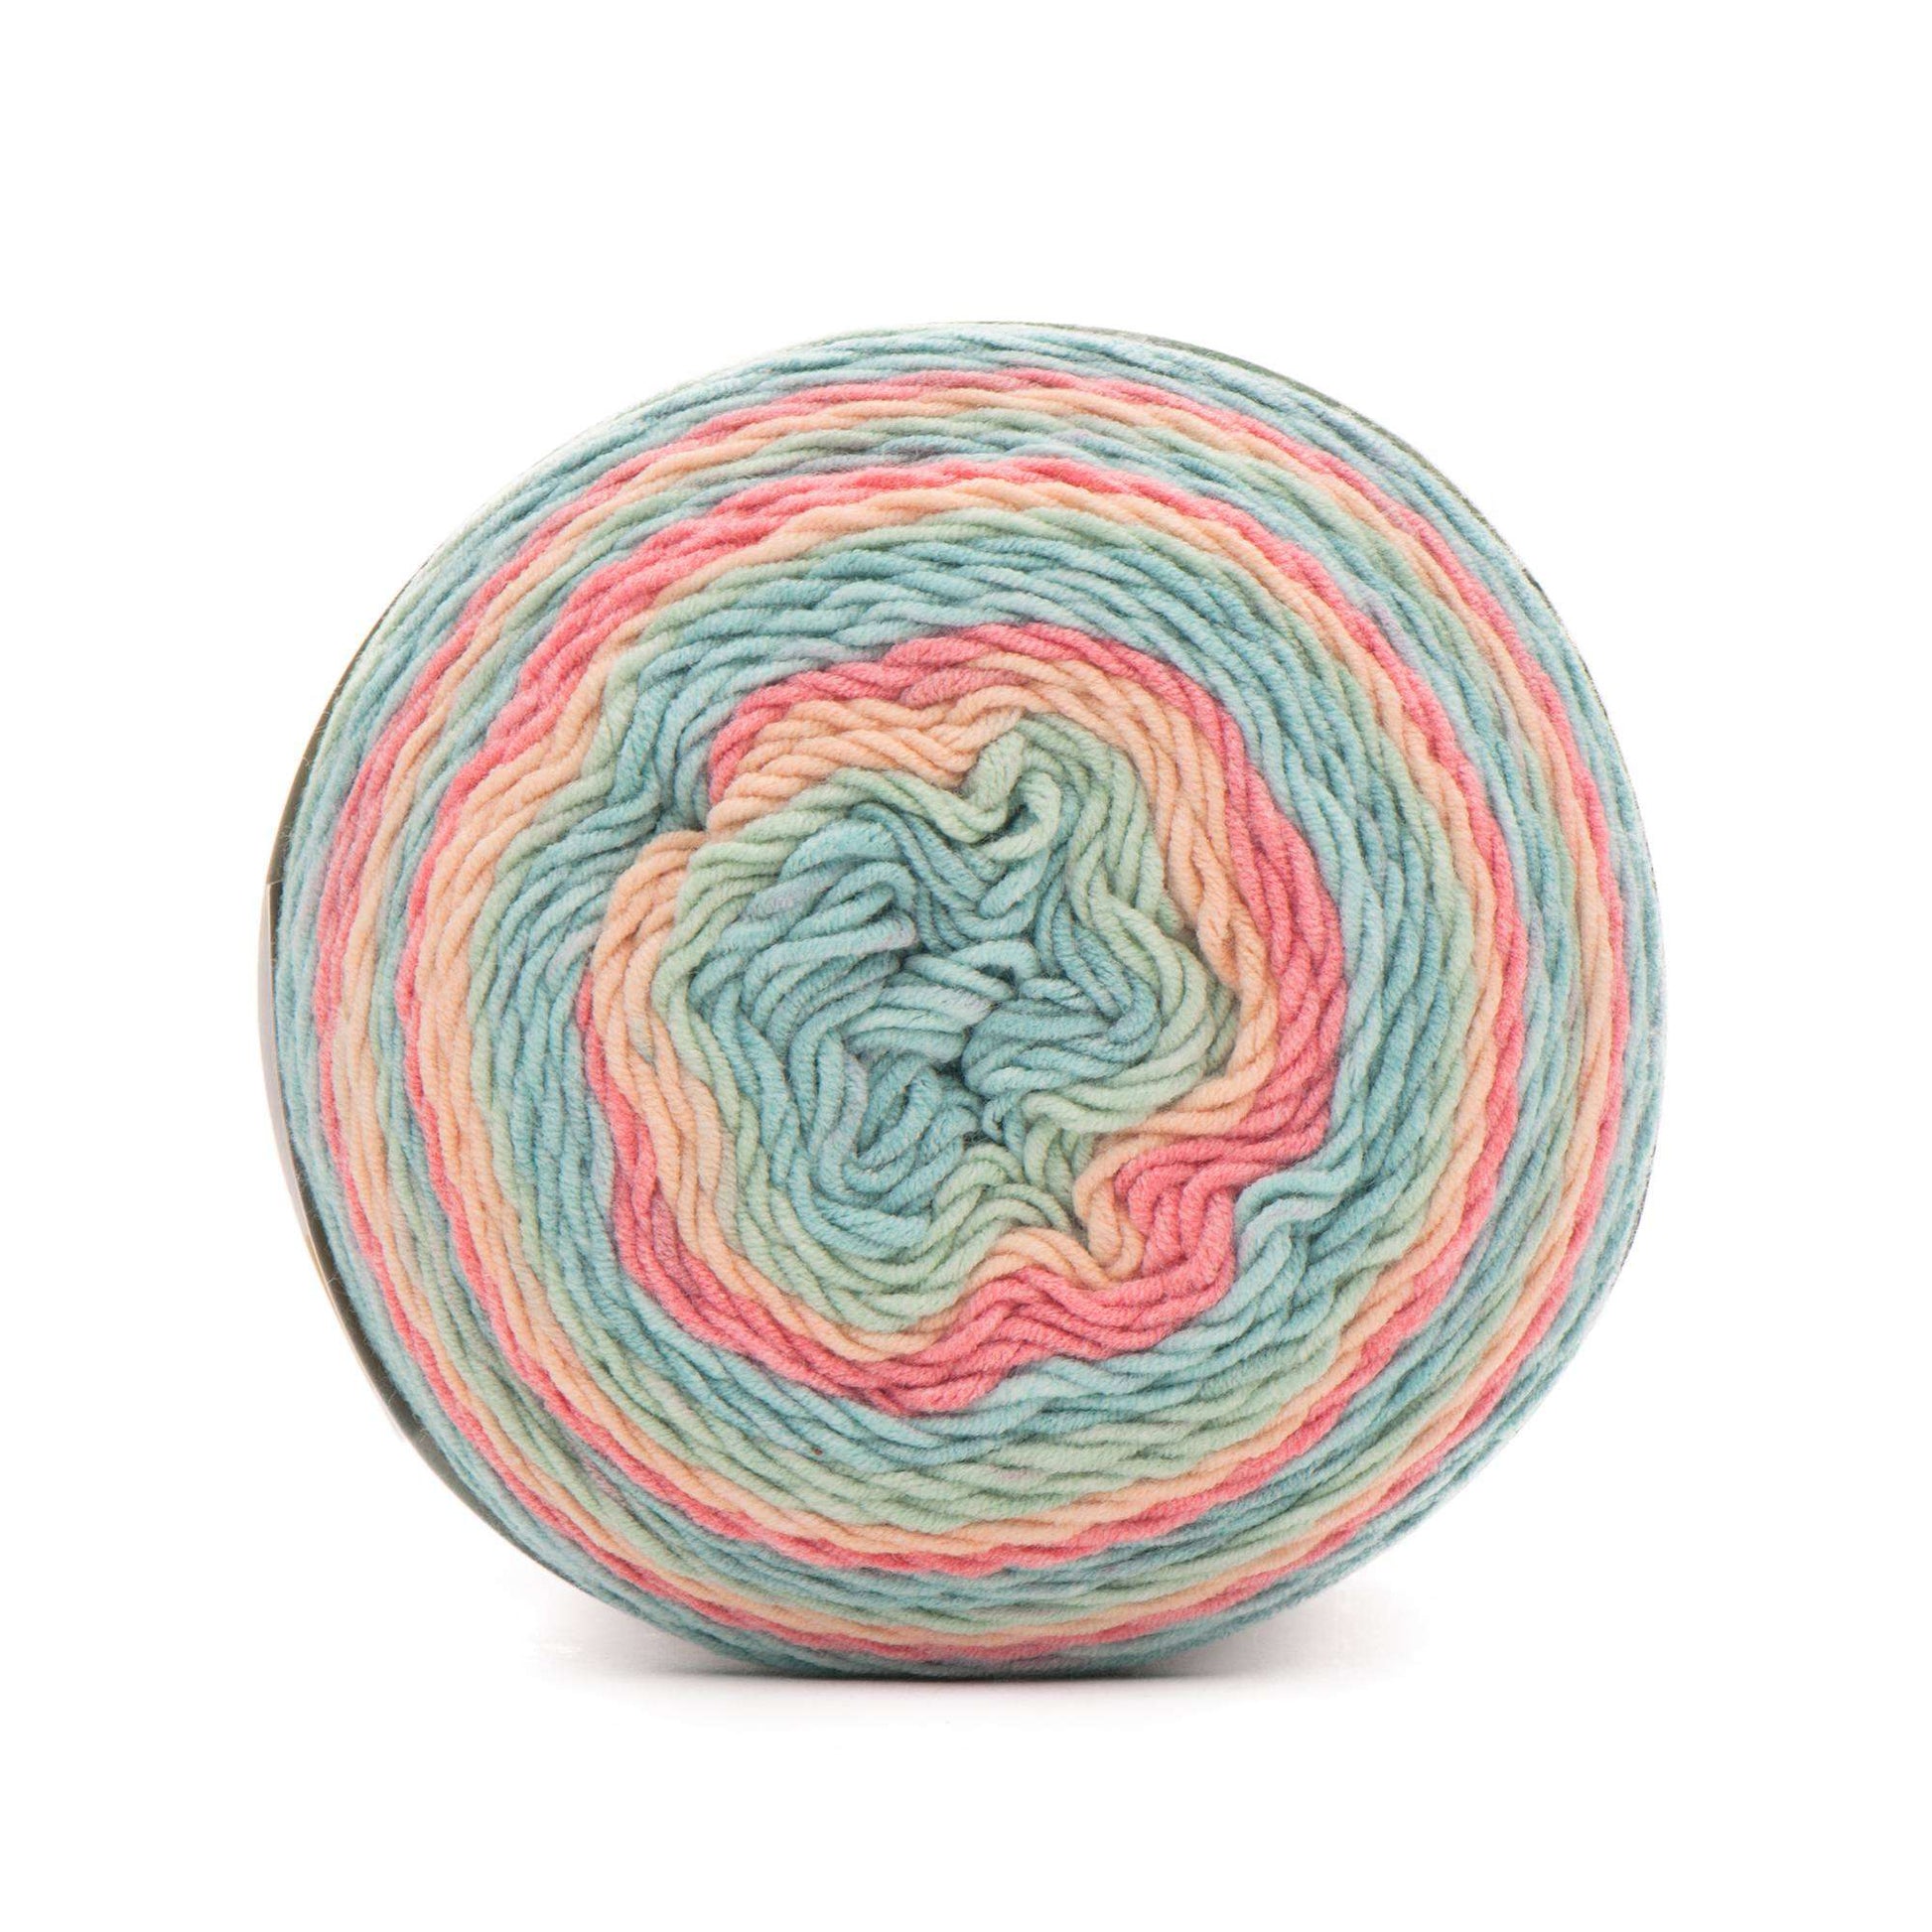  Caron Cotton Cakes - Driftwood : Arts, Crafts & Sewing